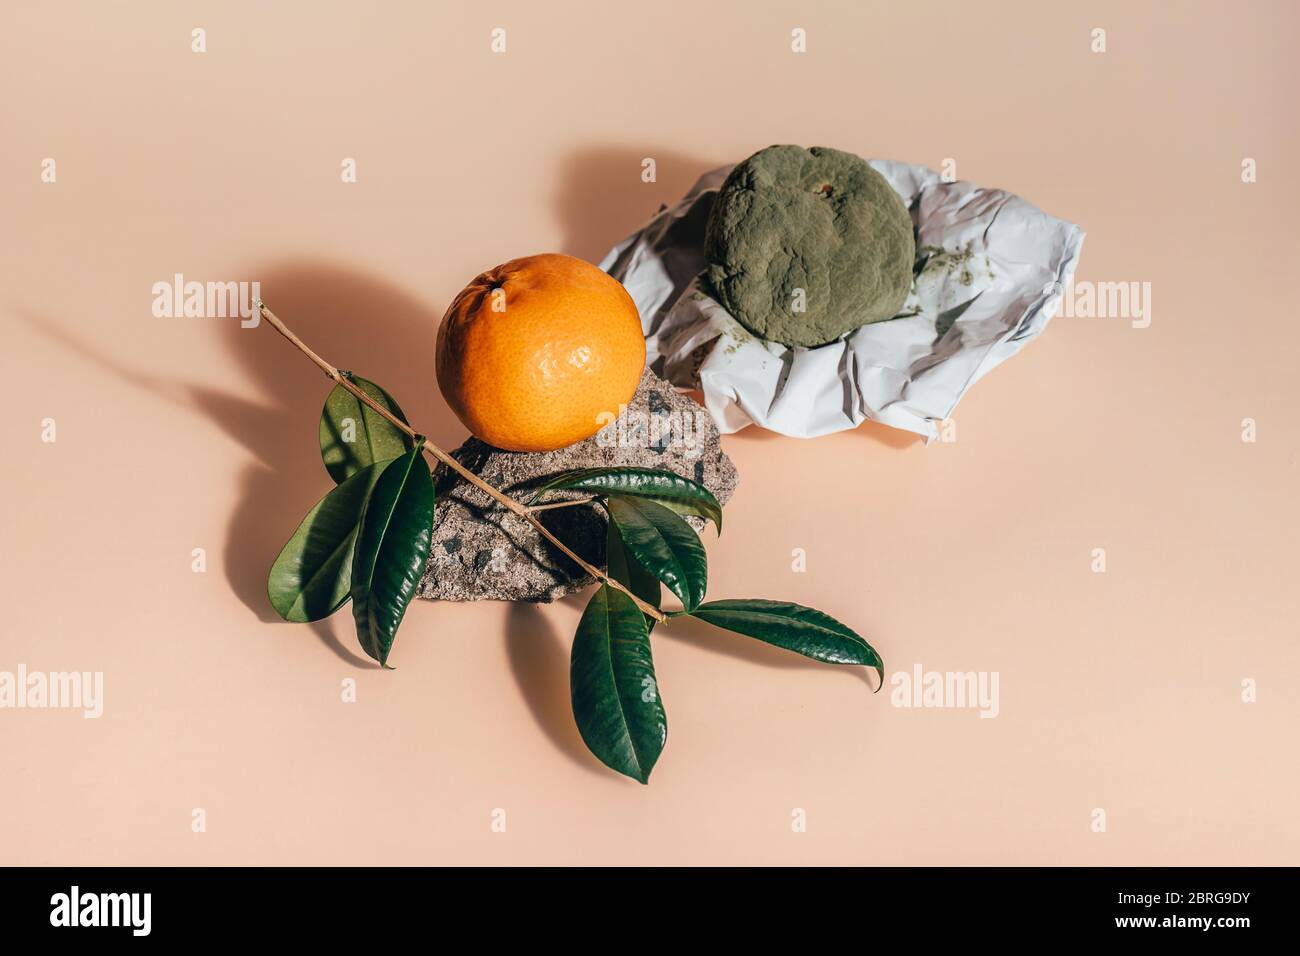 Fresh and rotten mandarins. Spoiled tangerines with green mold and fungus on paper and a ripe fresh one on a rock with a green branch with leaves on coral background. Stock Photo